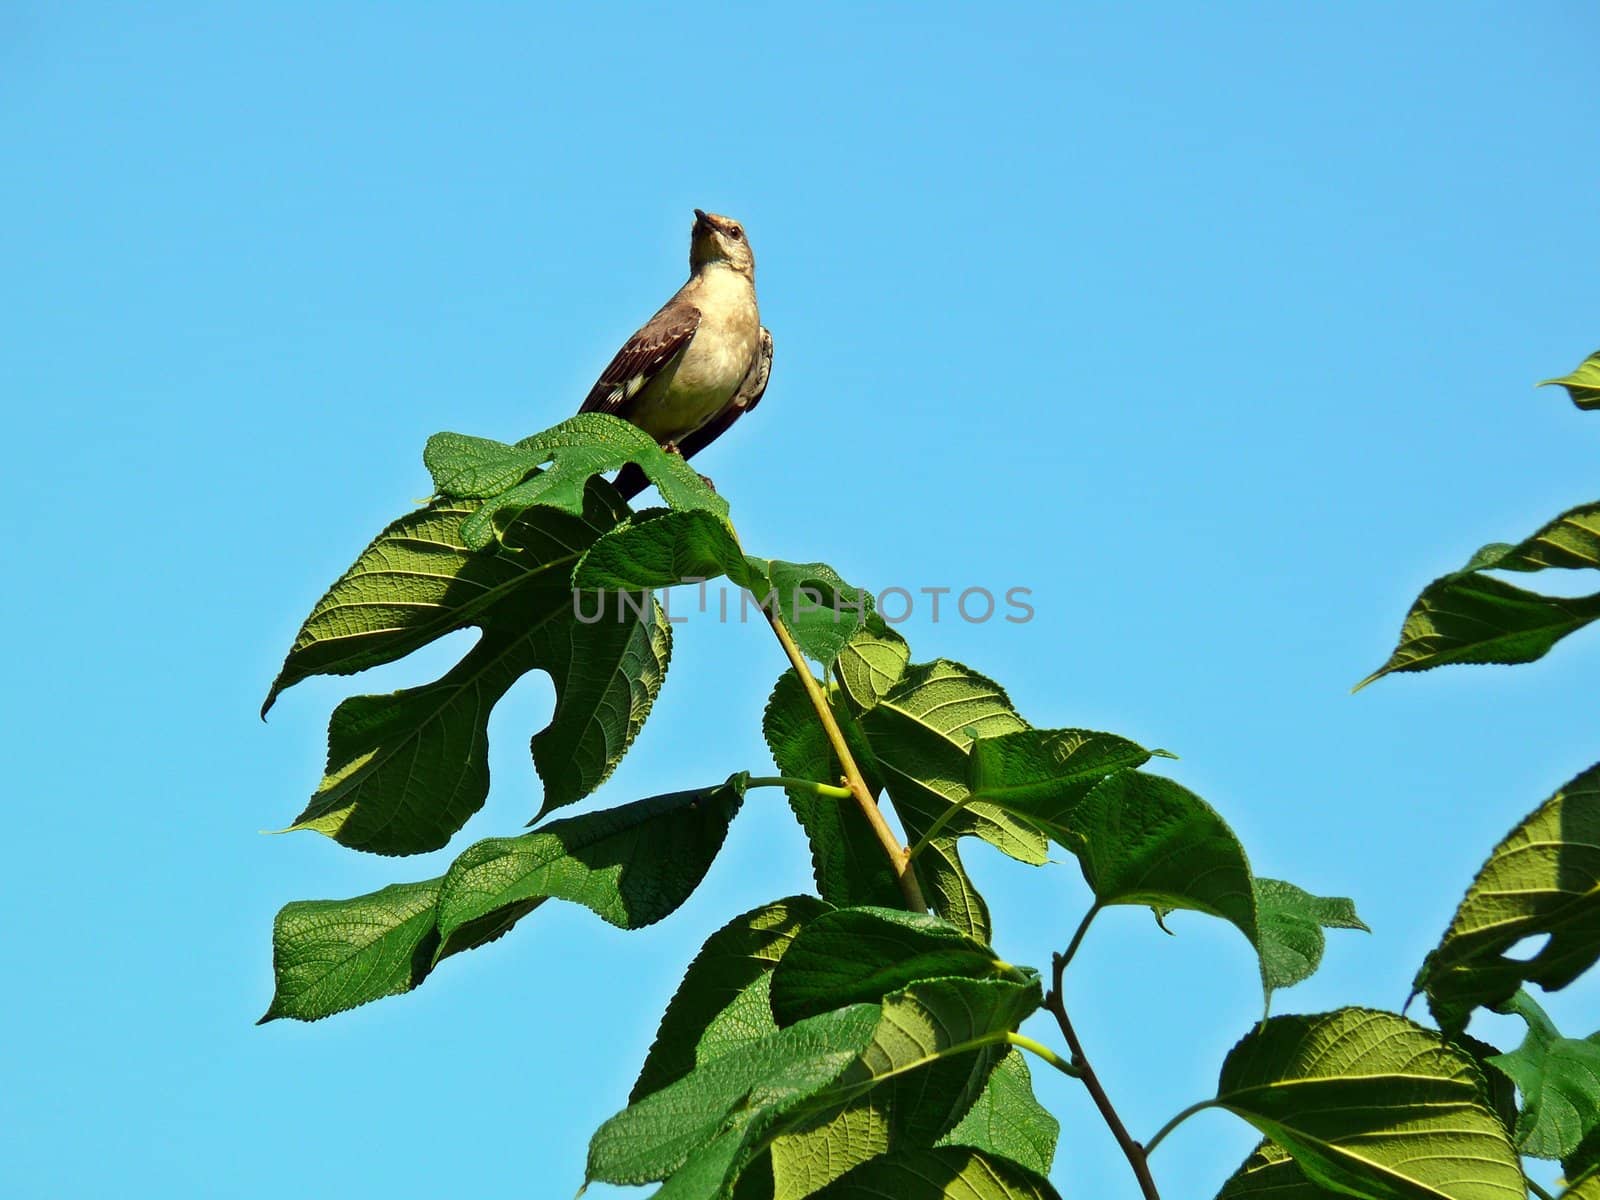 AMockingbird in a tree with the blue sky as background